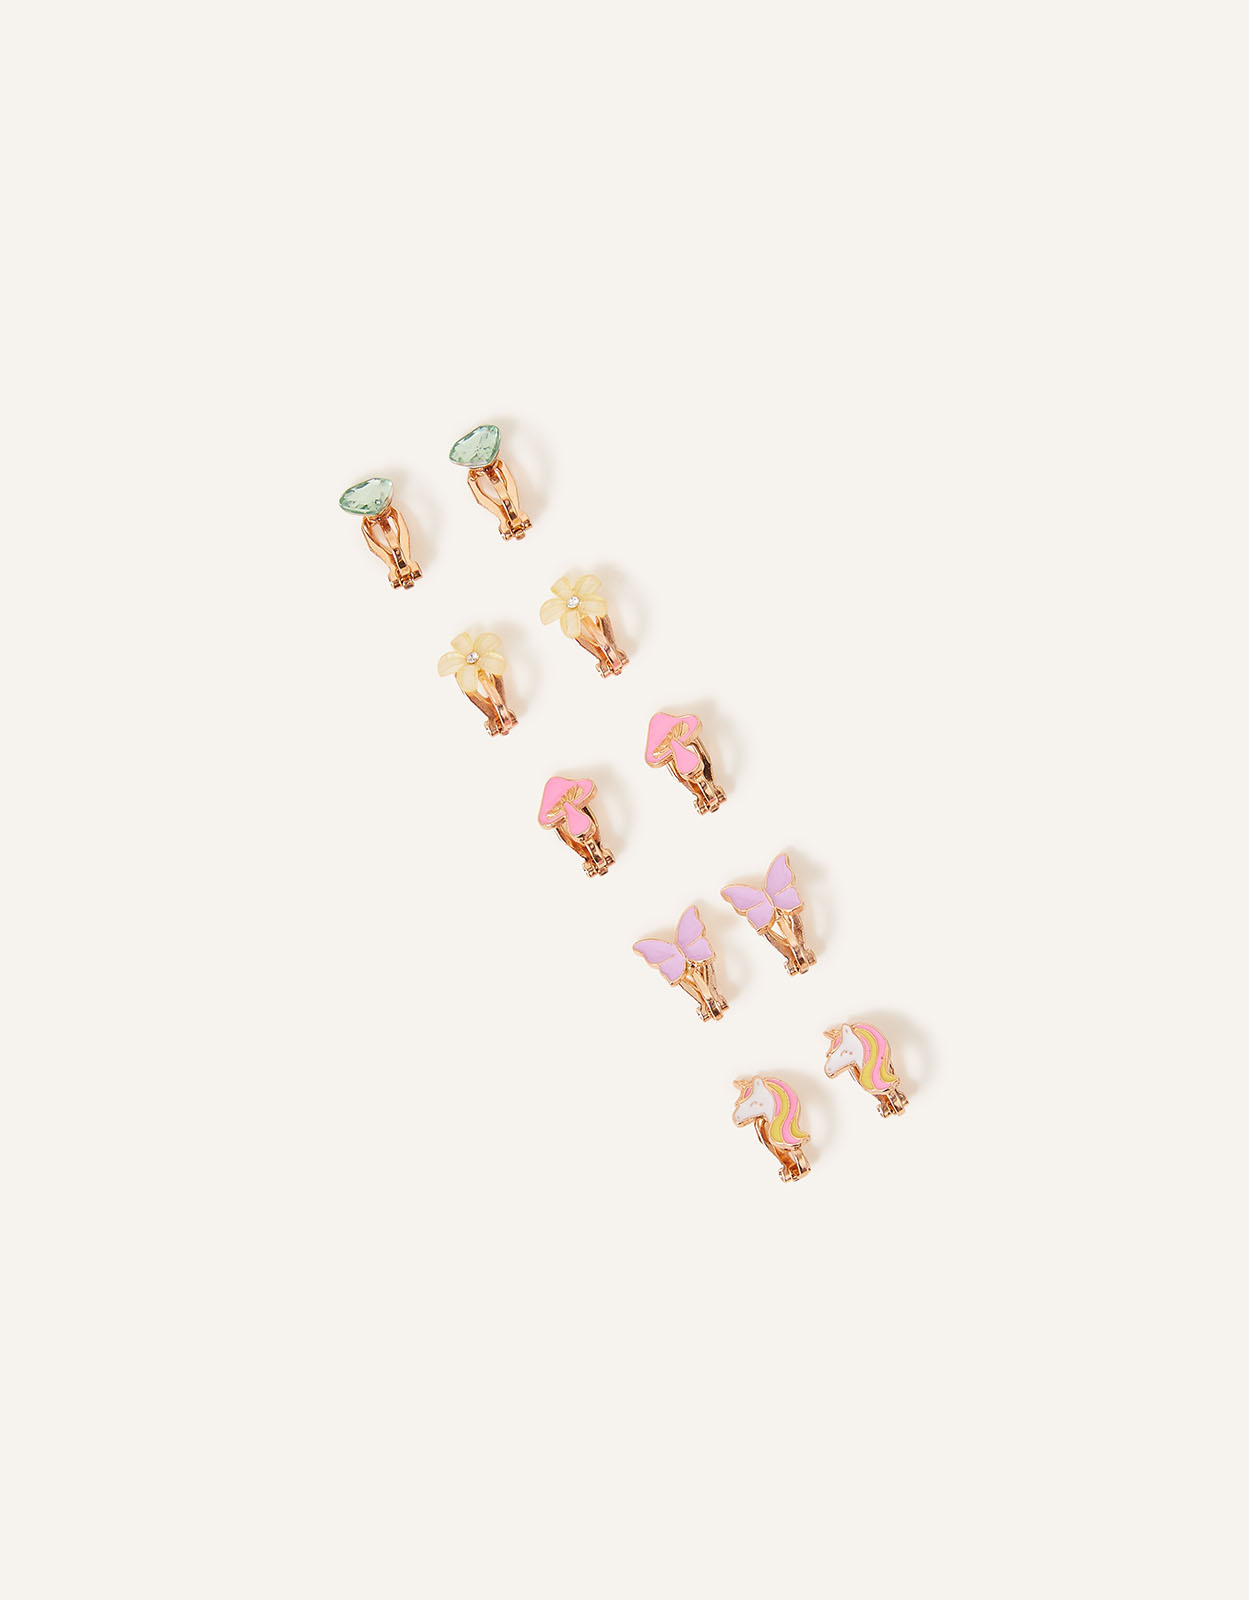 Accessorize Women's Gold, Pink and Green Unicorn Clip On Earrings 5 Pack, Size: 2cm